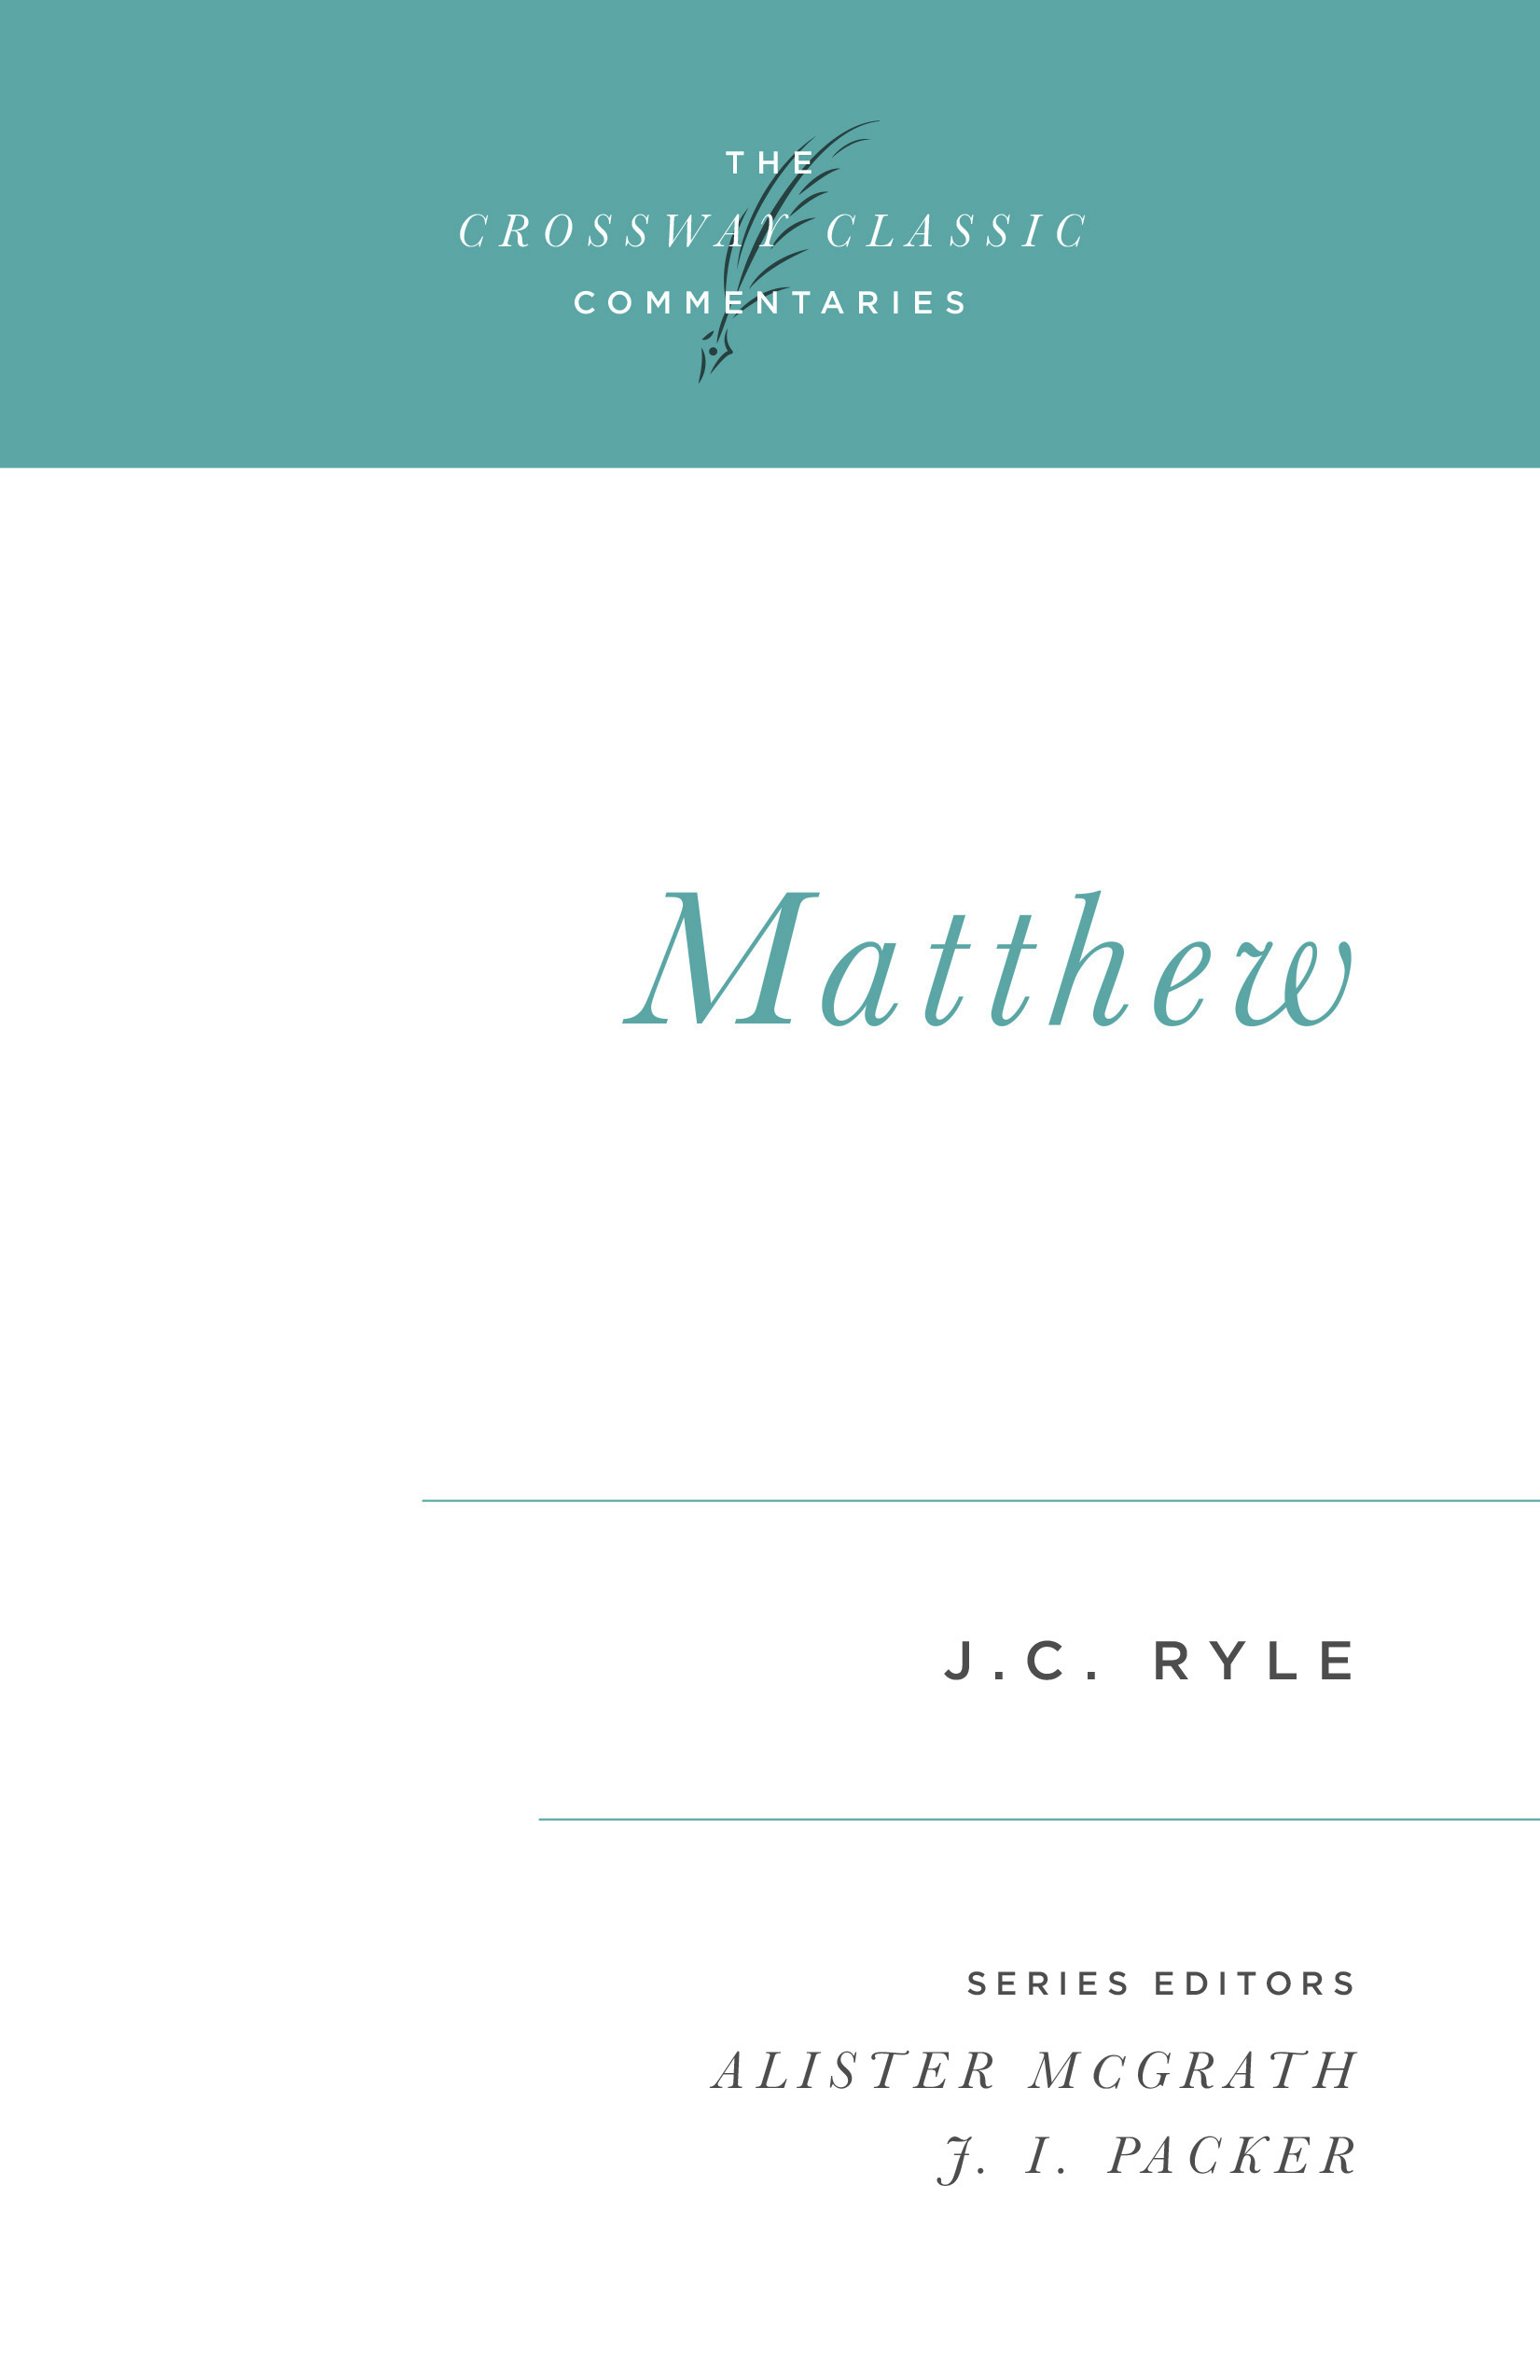 Matthew (Expository Thoughts on the Gospels)